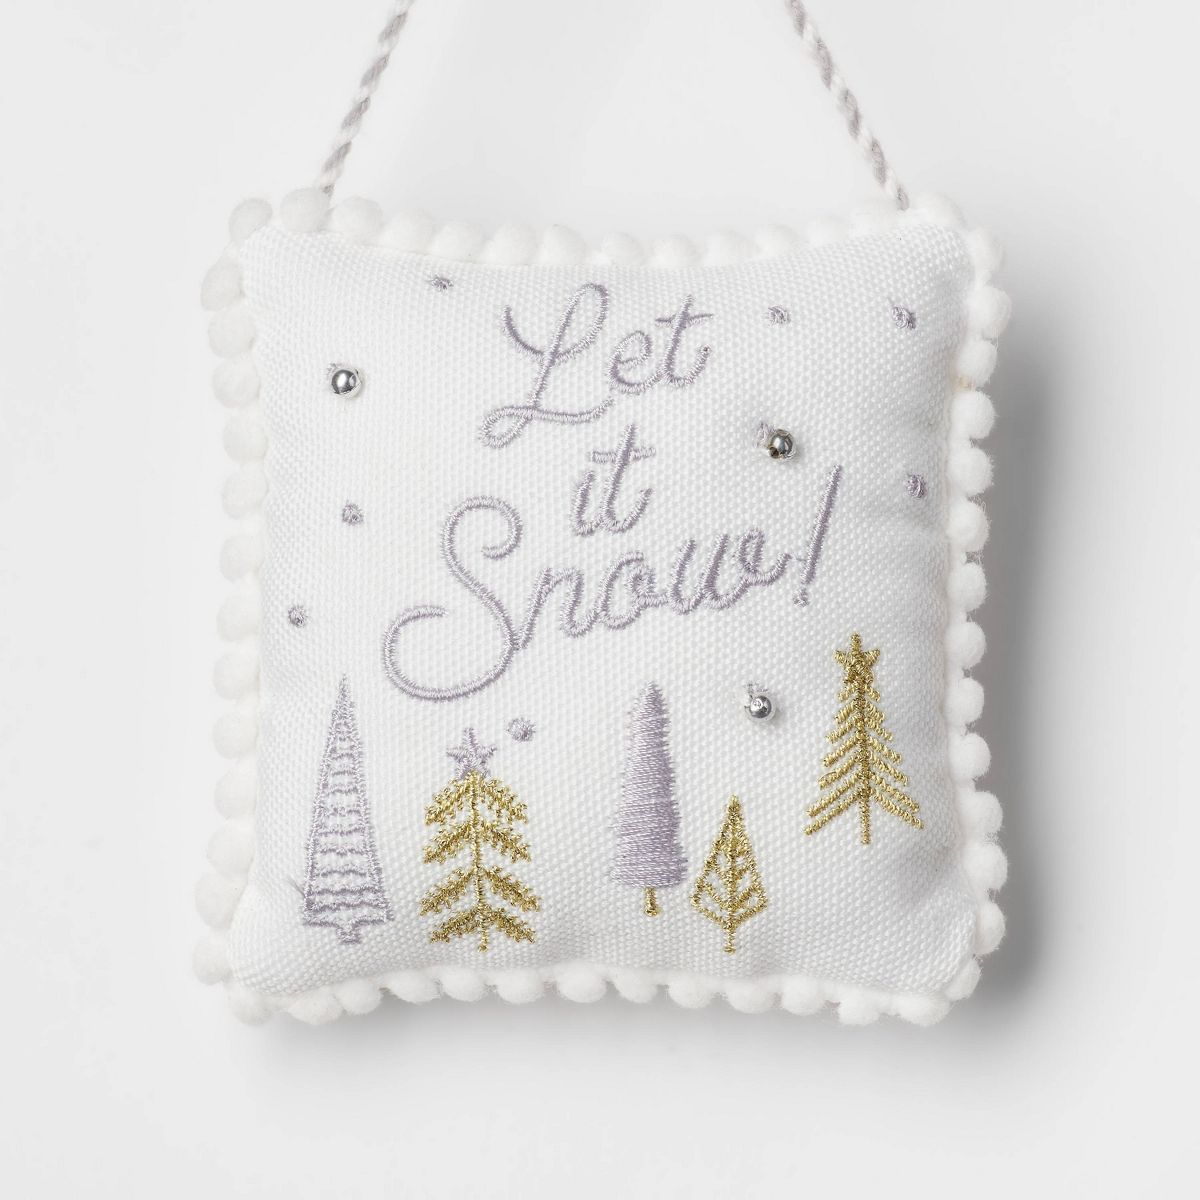 Embroidered 'Let it Snow' Fabric Pillow Christmas Tree Ornament White - Wondershop™ | Target